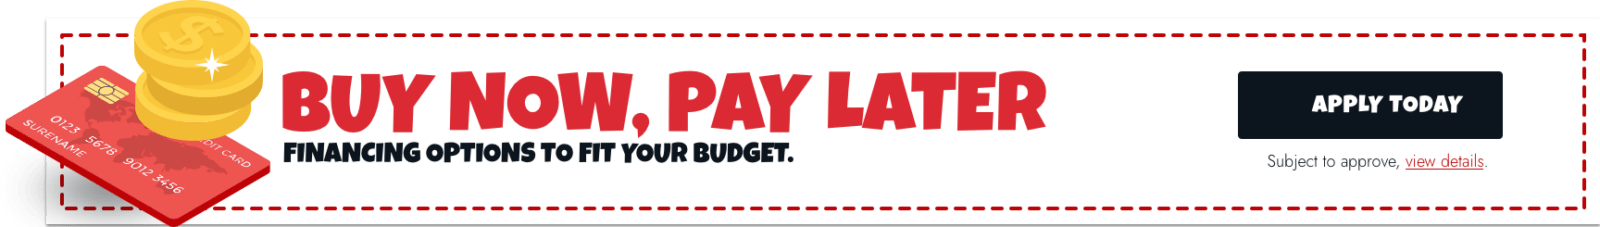 Buy now pay later banner | Big Bob's Flooring Outlet Colorado Springs